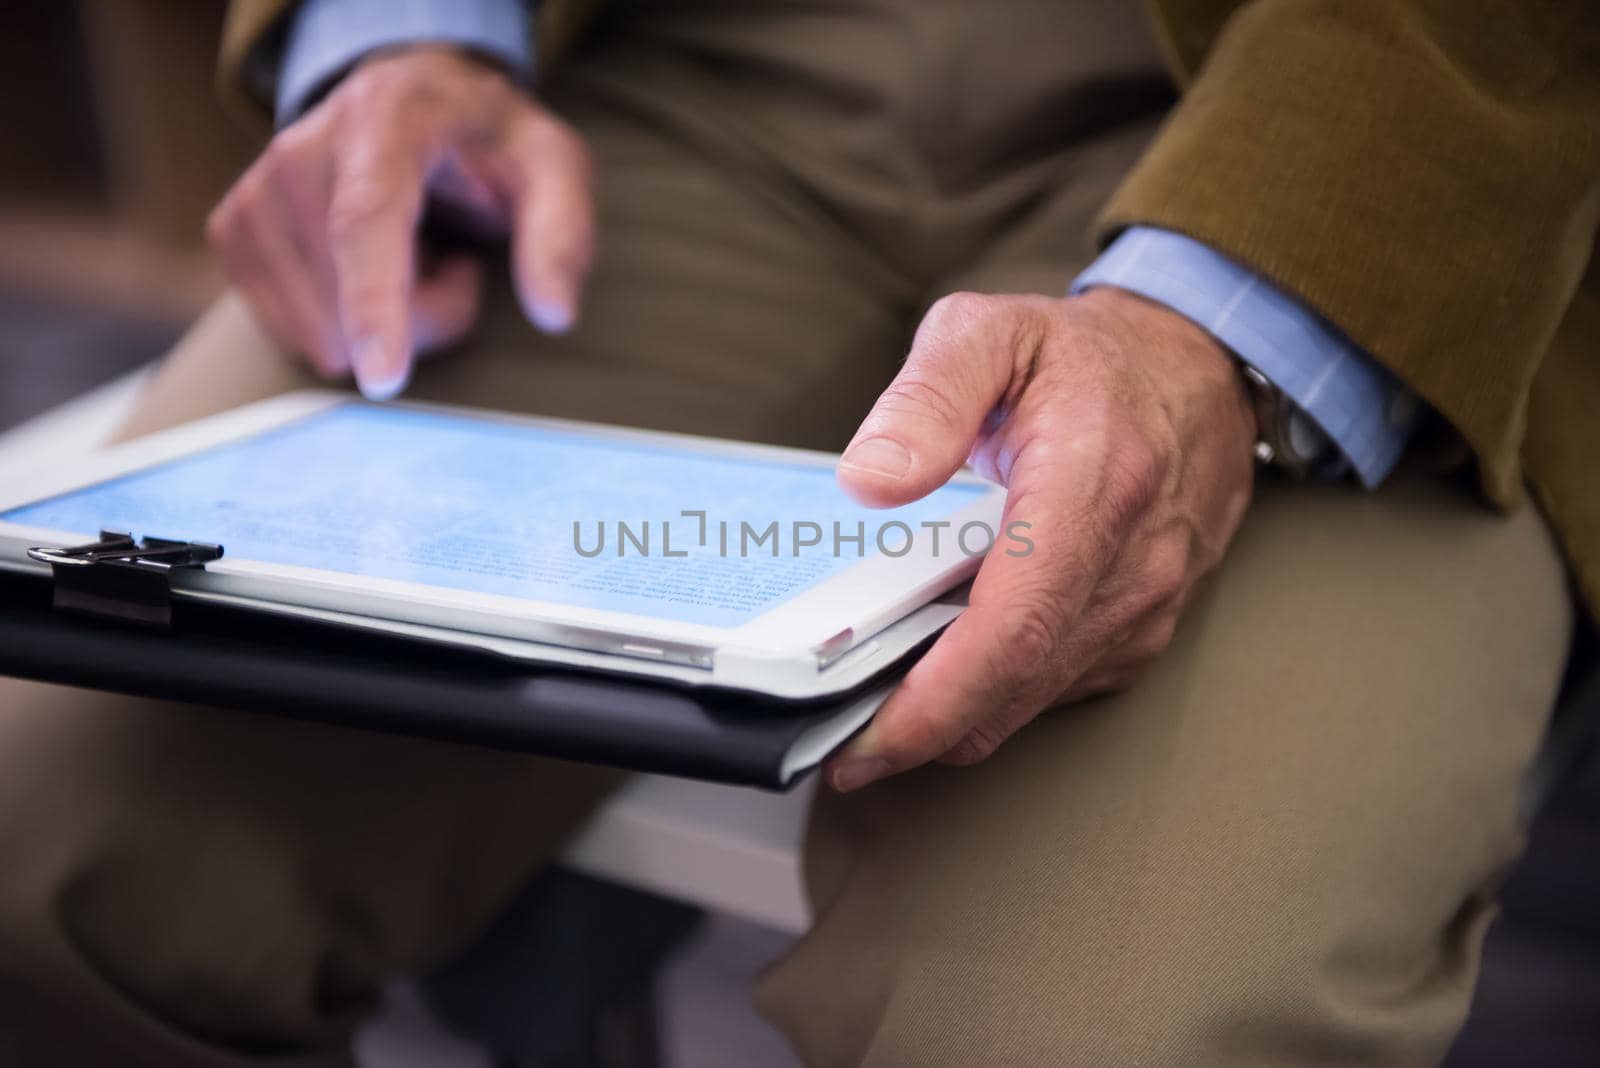 Closeup of mature hands holding tablet. Teacher with students in classroom